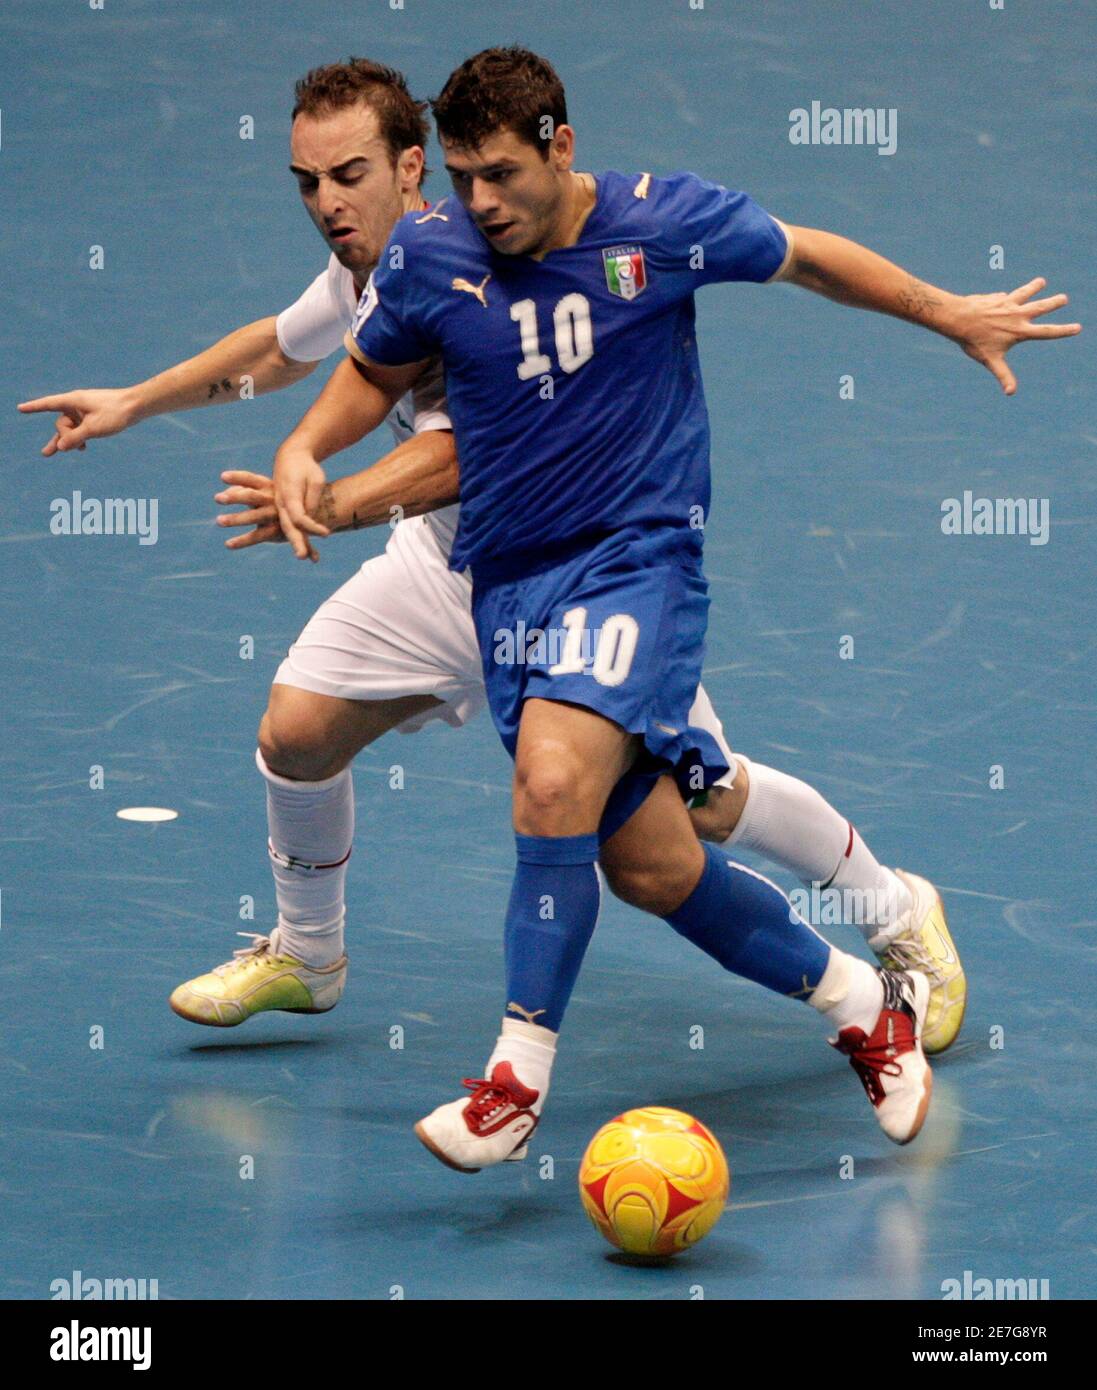 Adriano Foglia (R) of Italy controls the ball in front Ricardinho of  Portugal during their FIFA Futsal World Cup qualifying soccer match at the  Gimnasio Maracanazinho in Rio de Janeiro October 4,